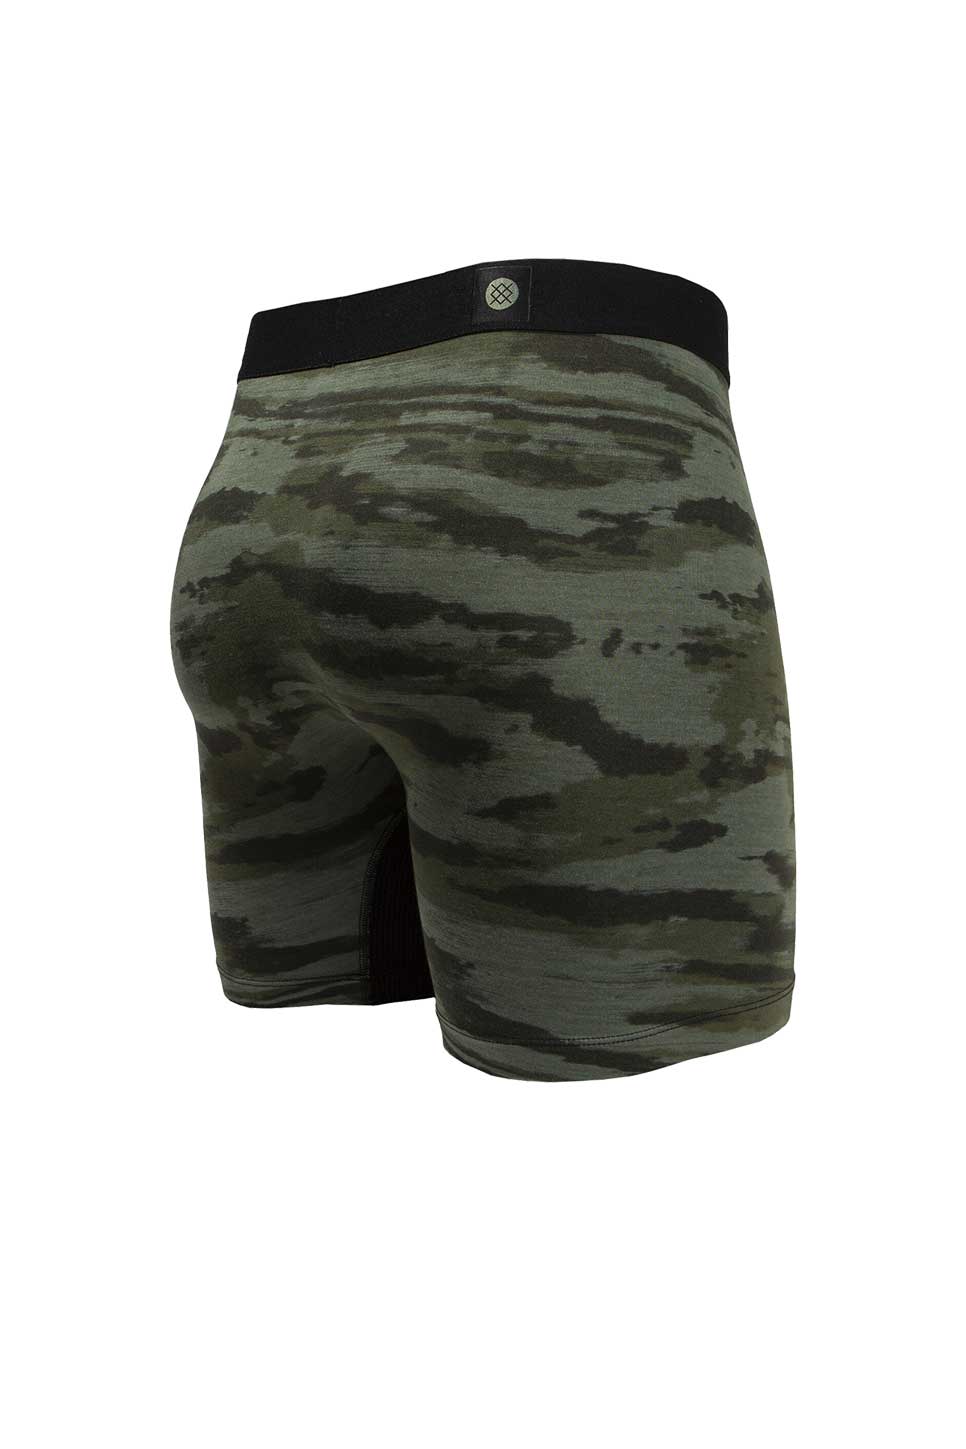 Stance - Ramp Camo Boxer Brief - Army Green - Back